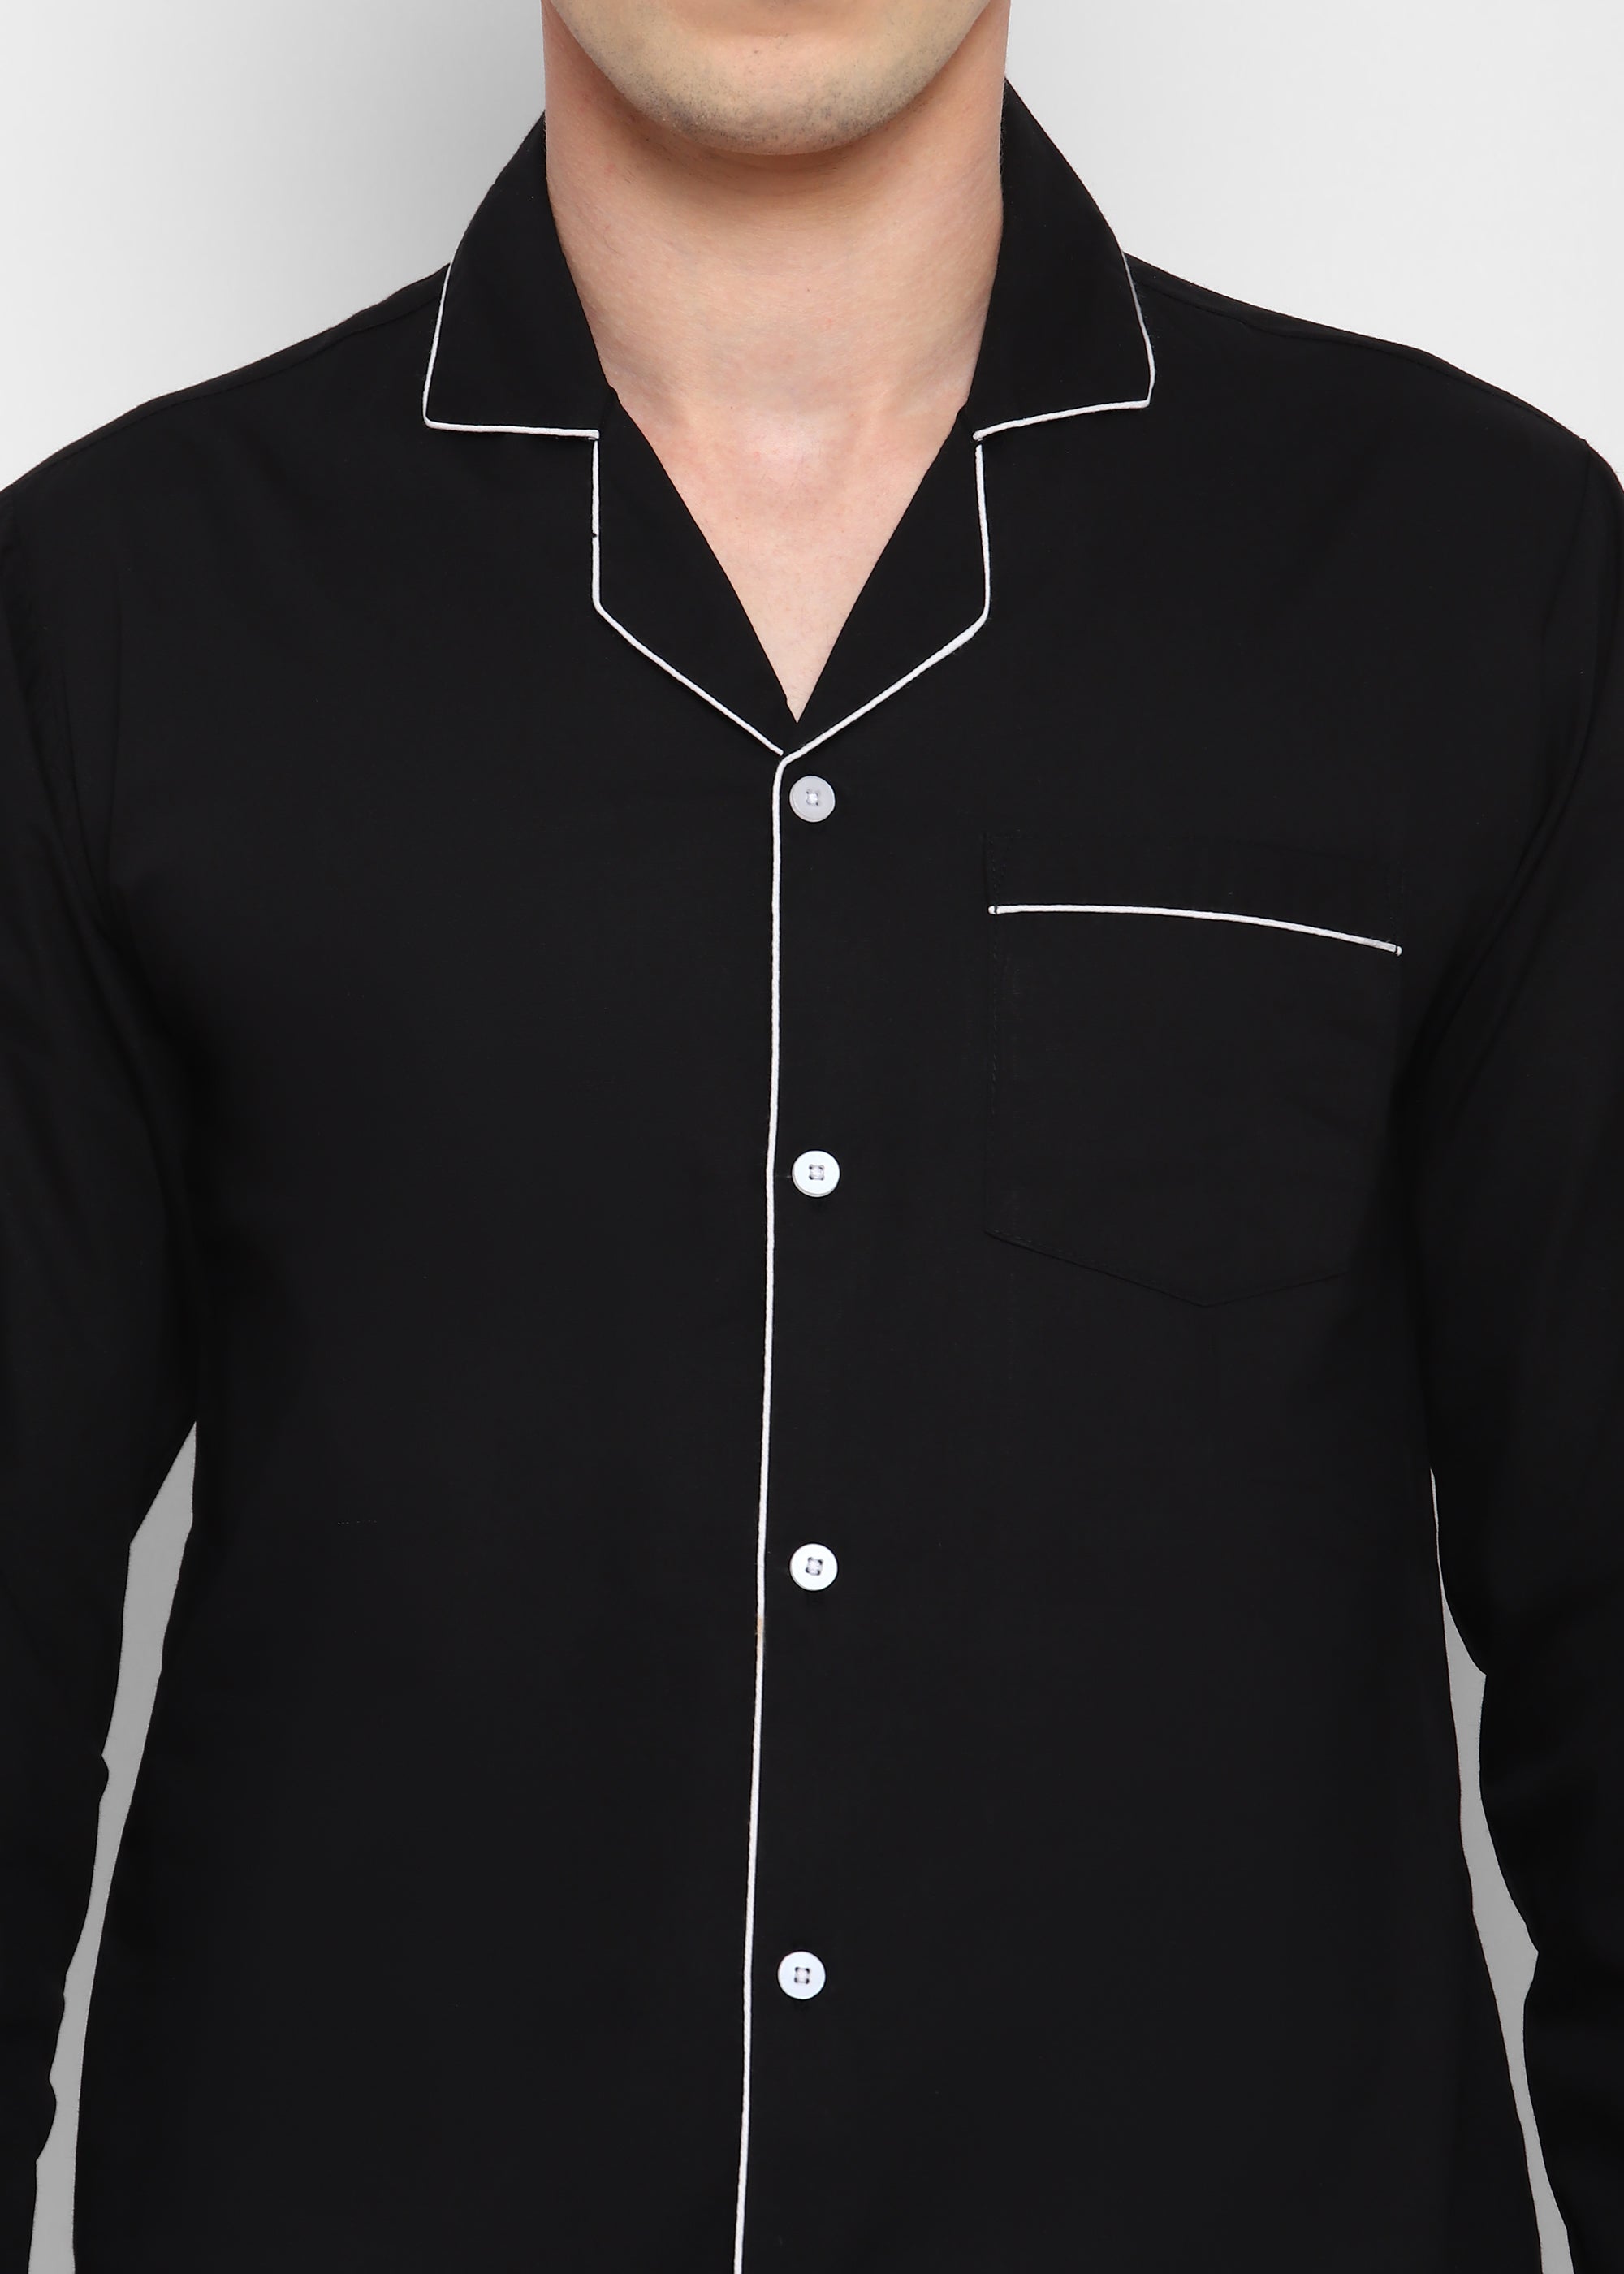 Black Cotton with White Piping Men's Night Suit